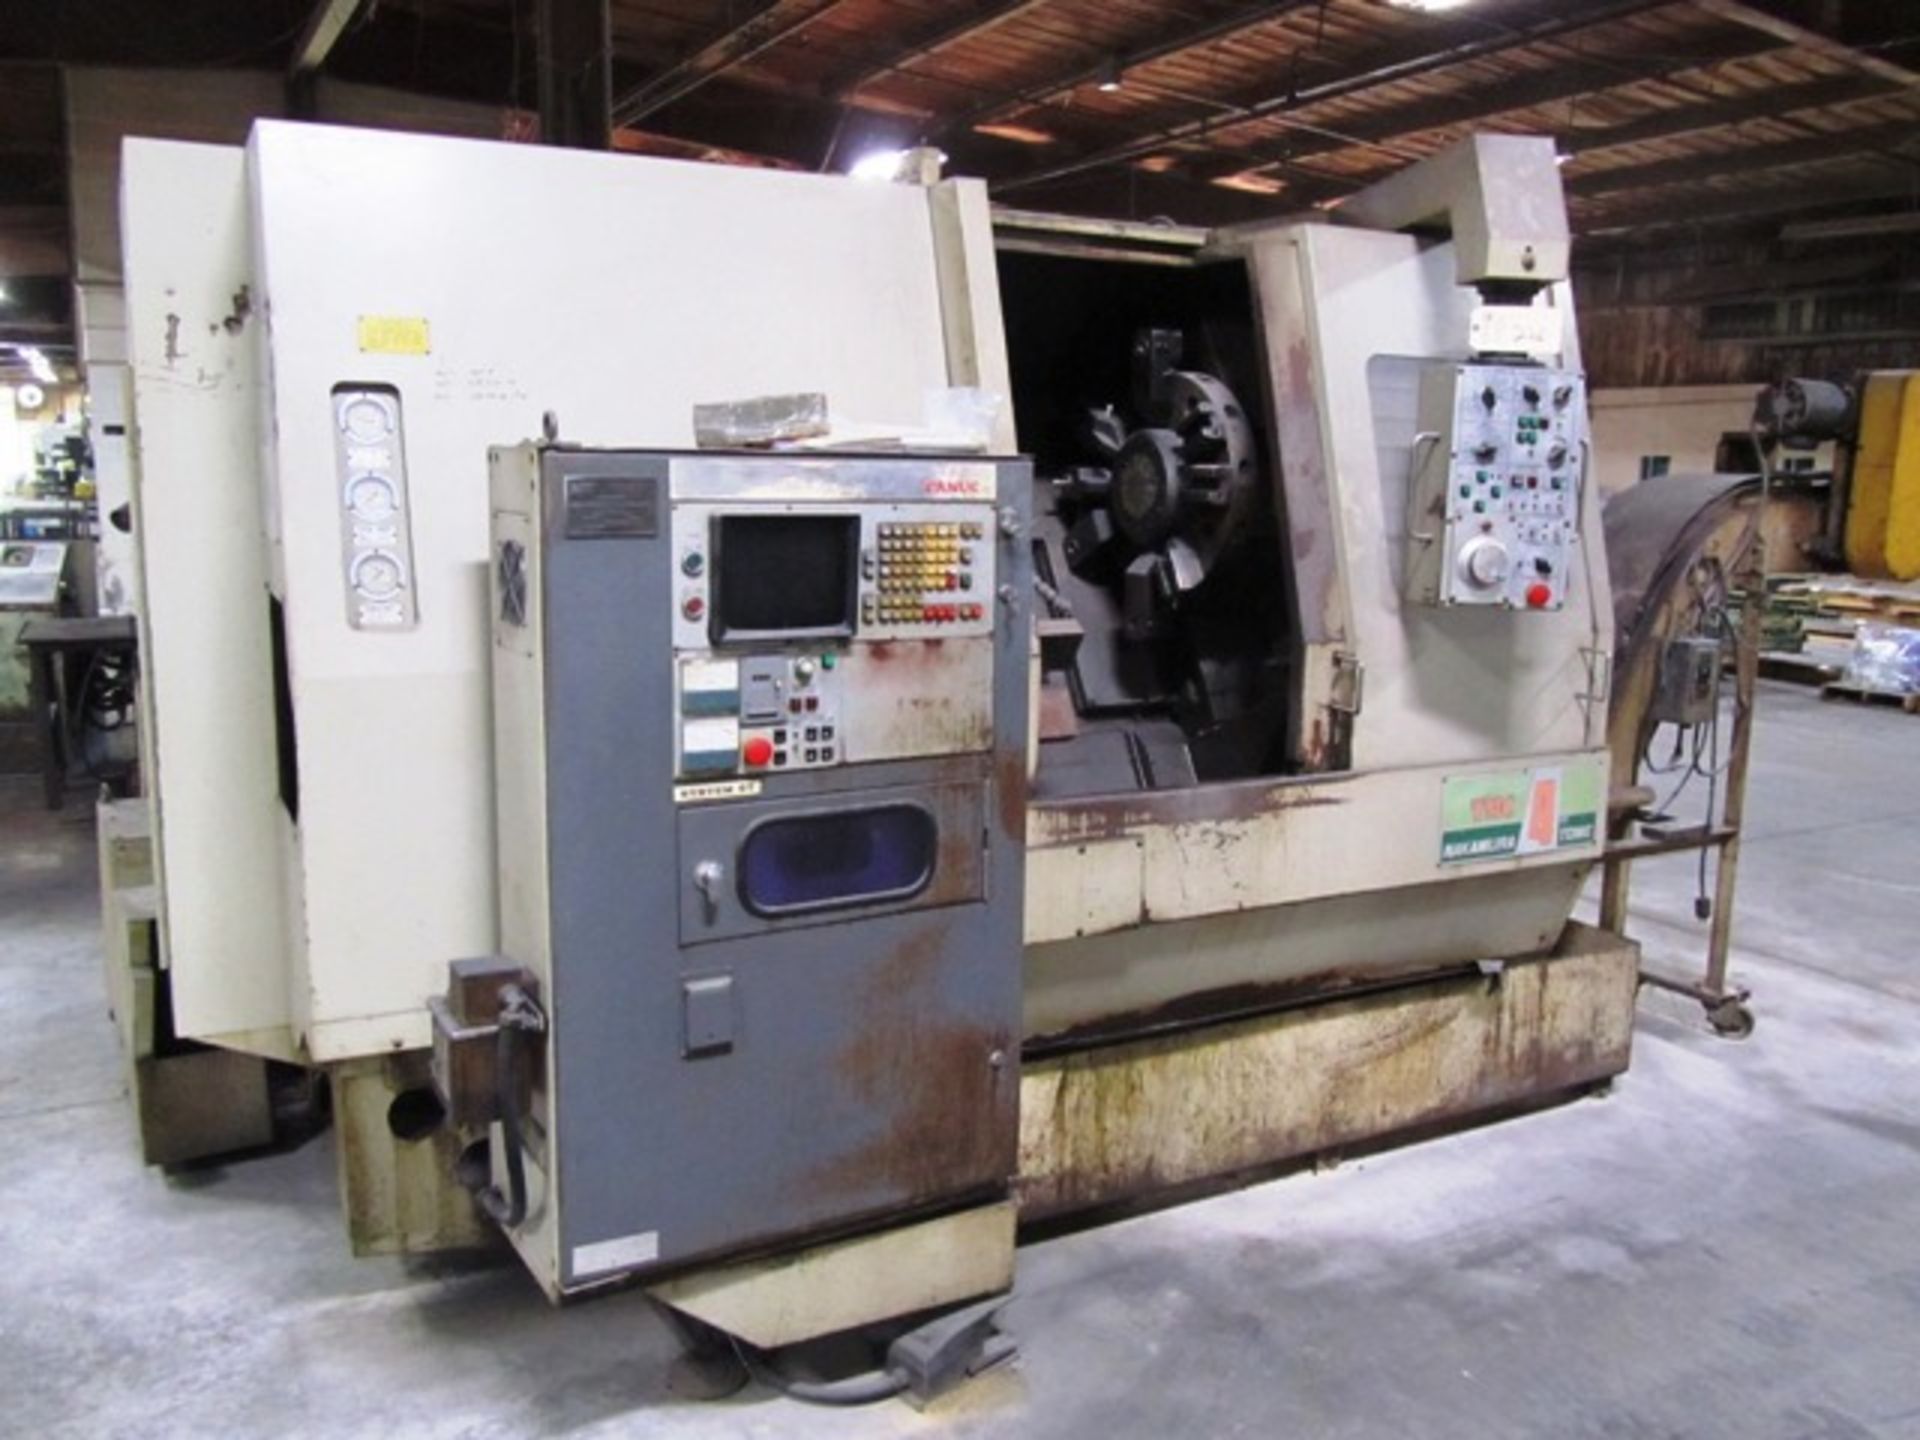 Nakamura Tome Model TMC4 CNC Turning Center with 10'' 3-Jaw Chuck, 12 Position Turret, Fanuc